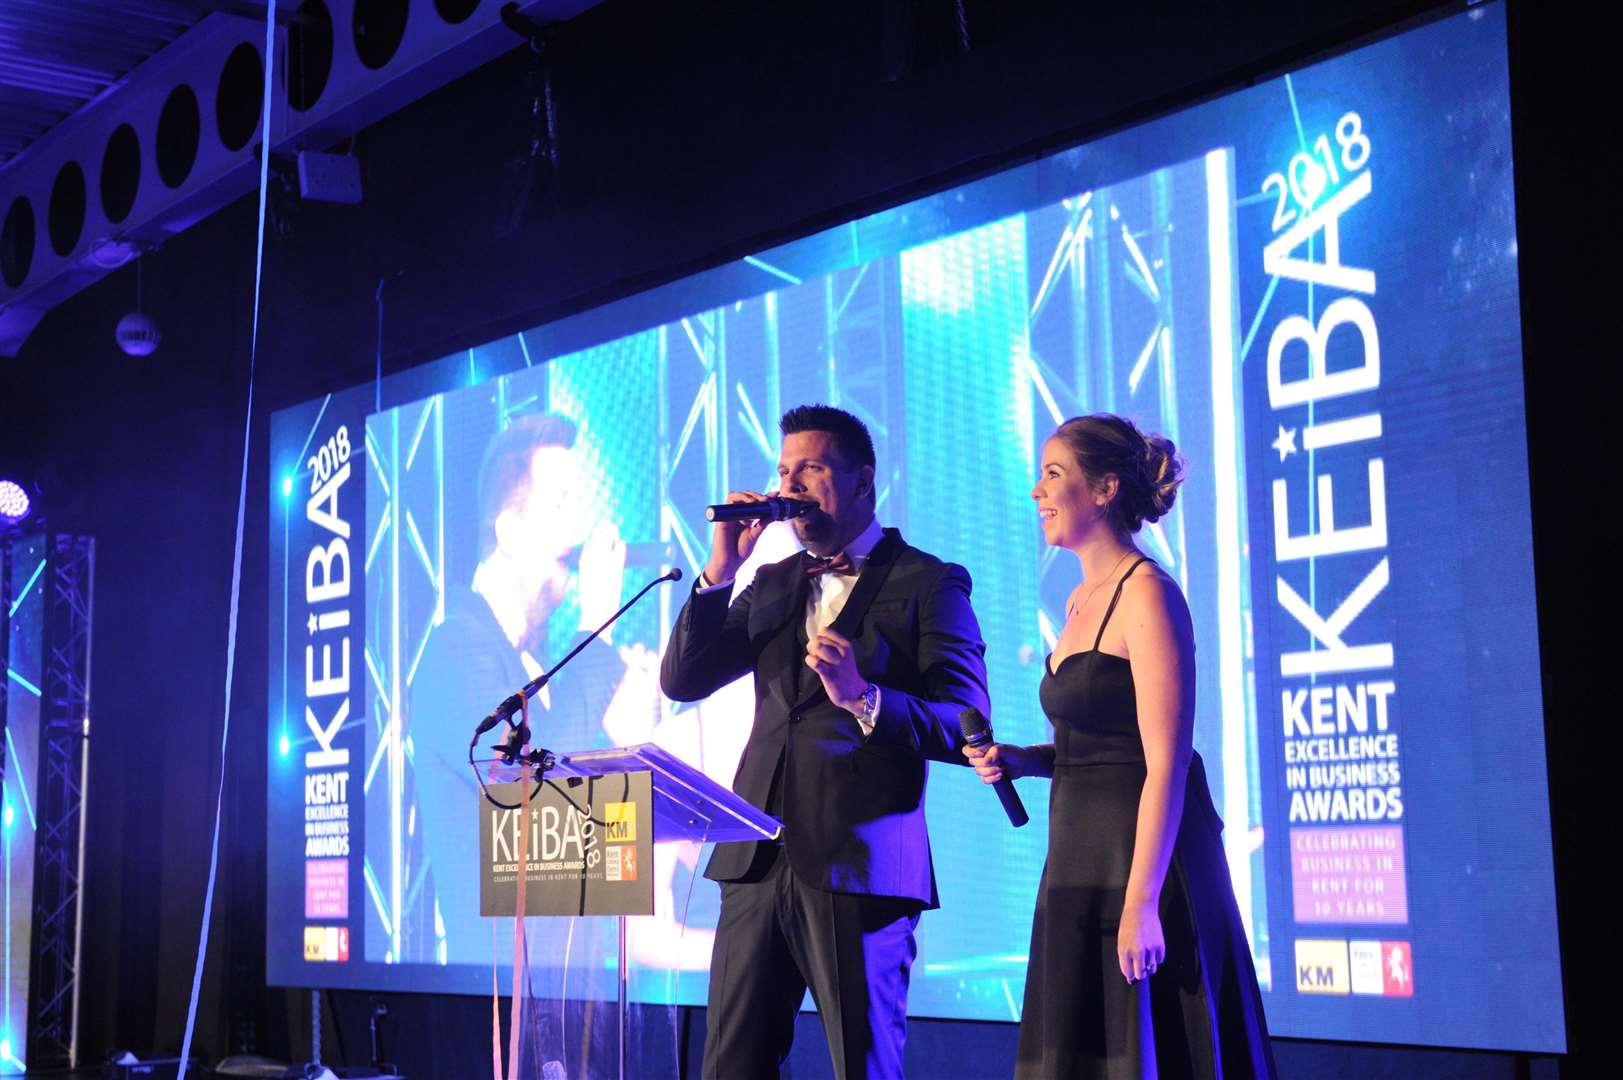 KEiBA 2018 gala ceremony took place at the Kent Event Centre in Detling